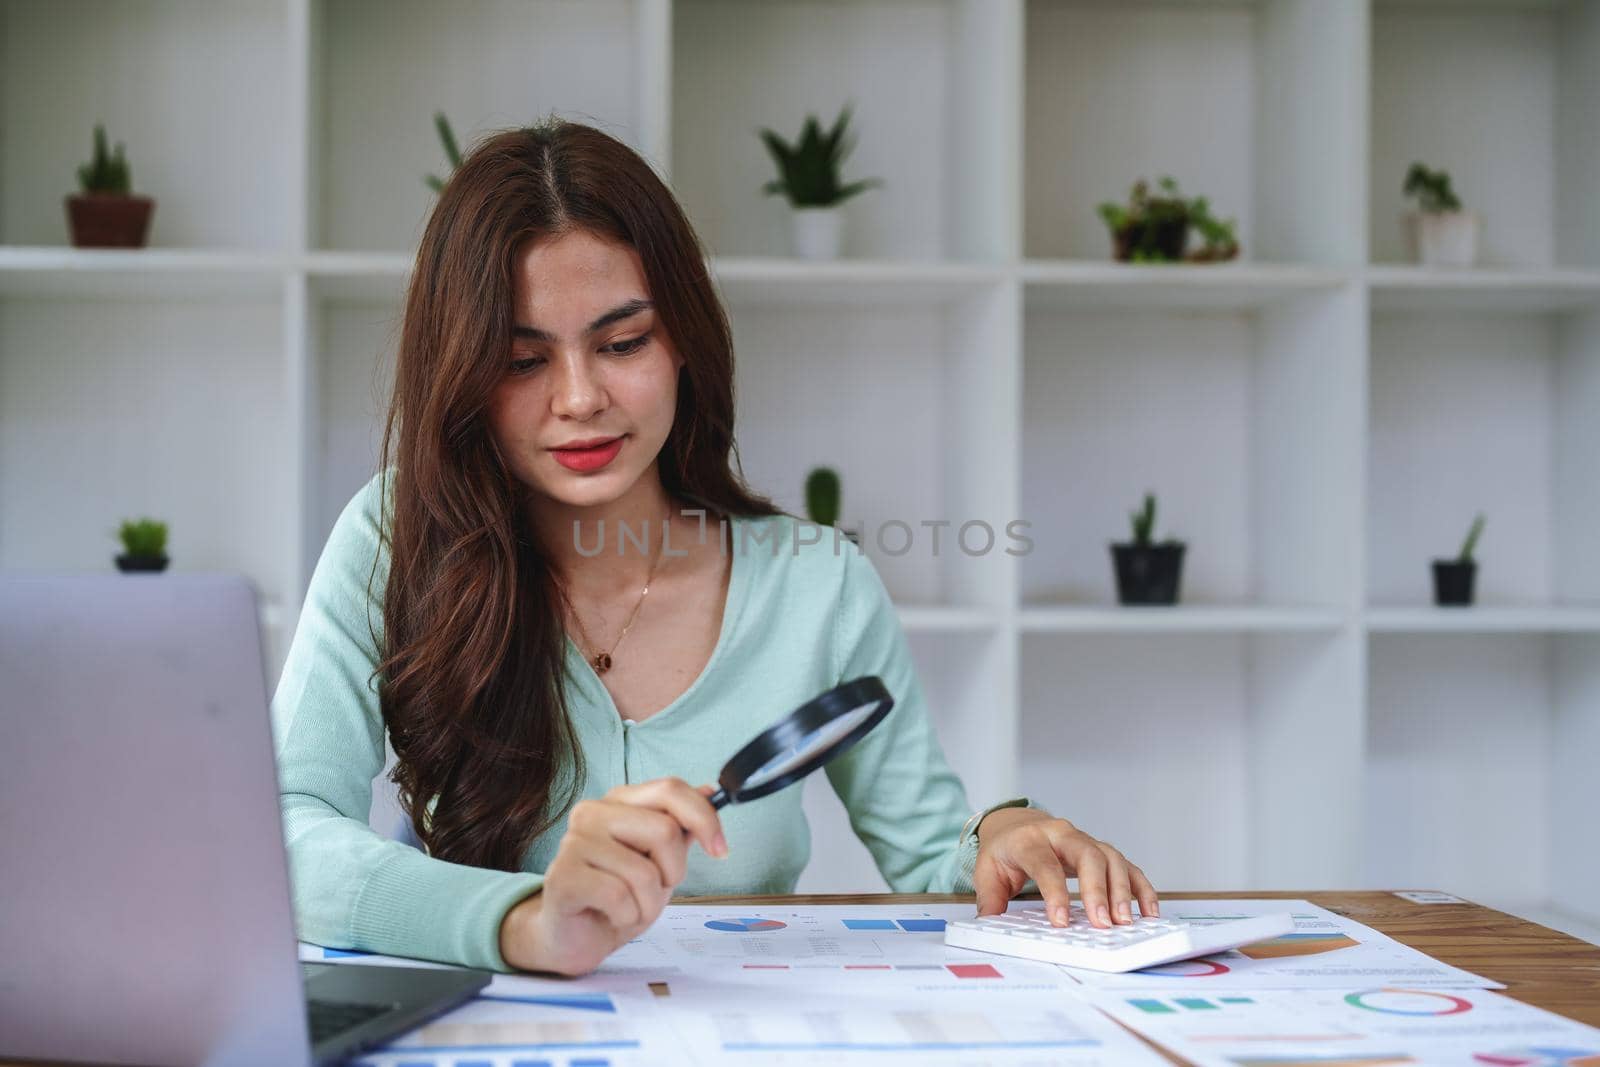 A half-bred girl, an audit employee, an accountant holding a magnifying glass and using a calculator to check the financial statement documents to calculate the annual tax payment to the IRS.